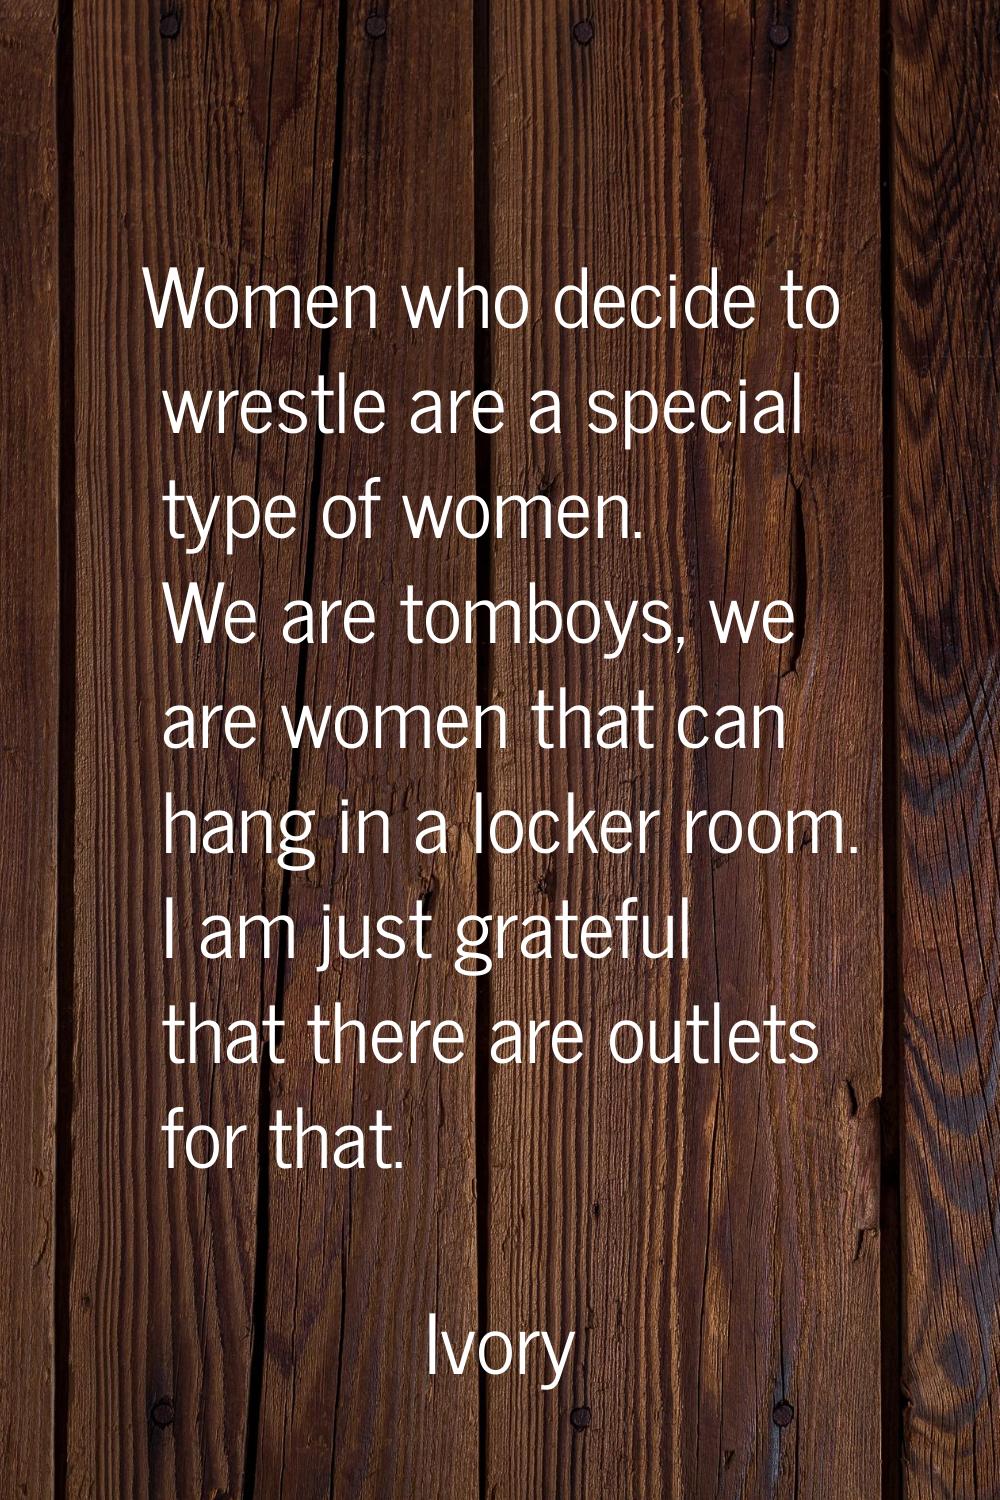 Women who decide to wrestle are a special type of women. We are tomboys, we are women that can hang